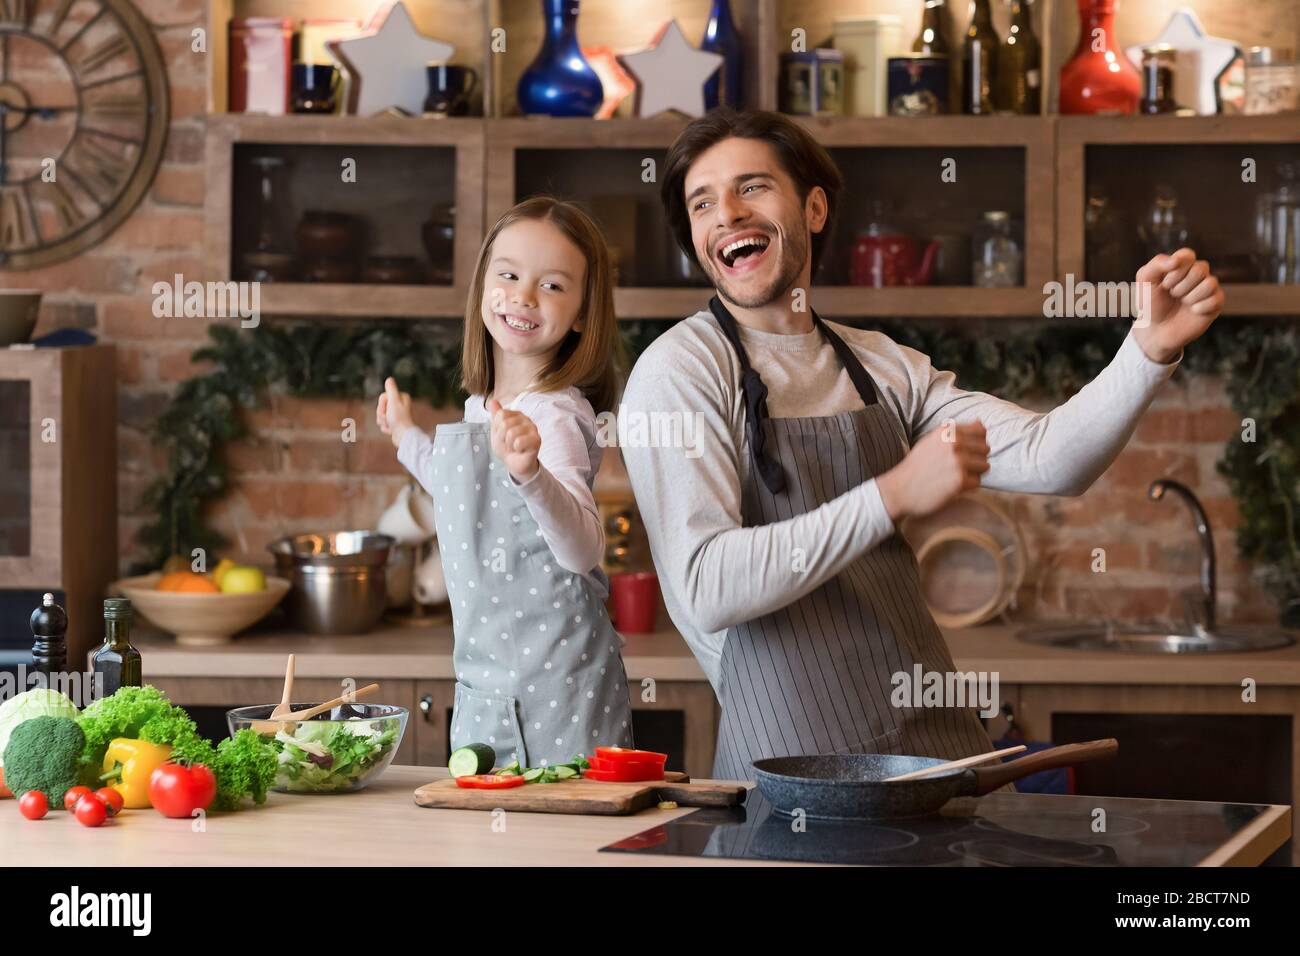 Portrait Of Cheerful Little Girl And Her Dad Dancing In Kitchen Stock Photo